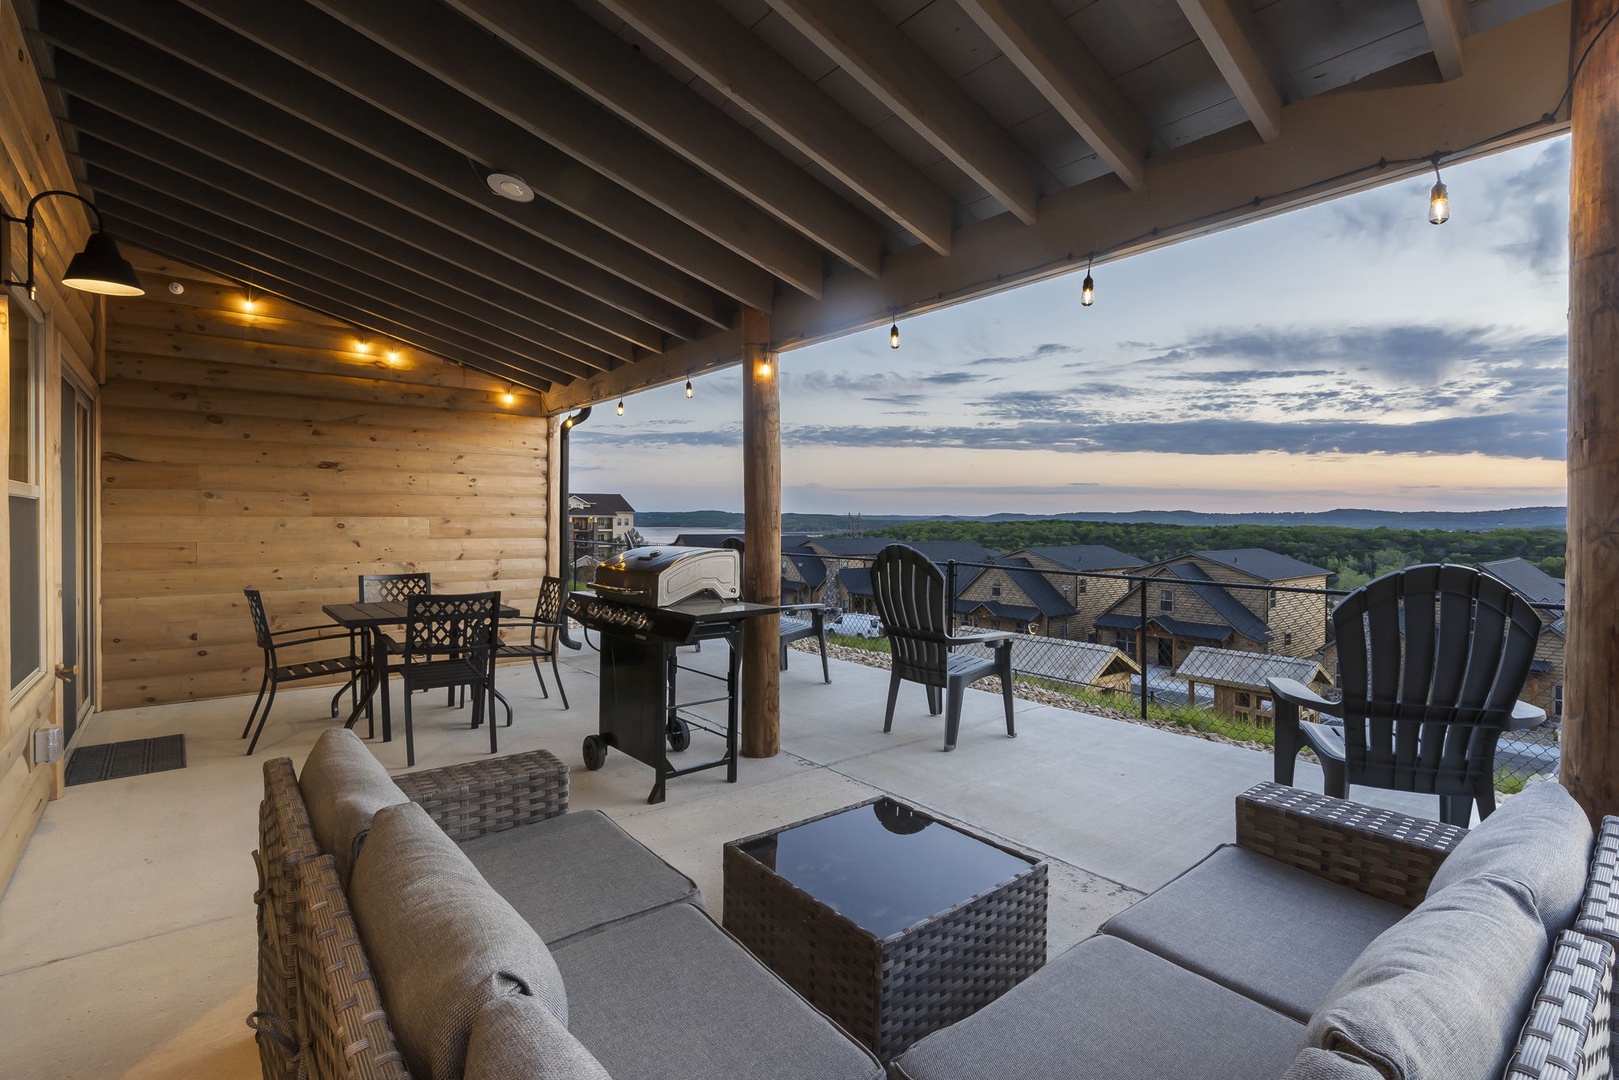 Step out onto the patio & soak in the sweeping, stunning views